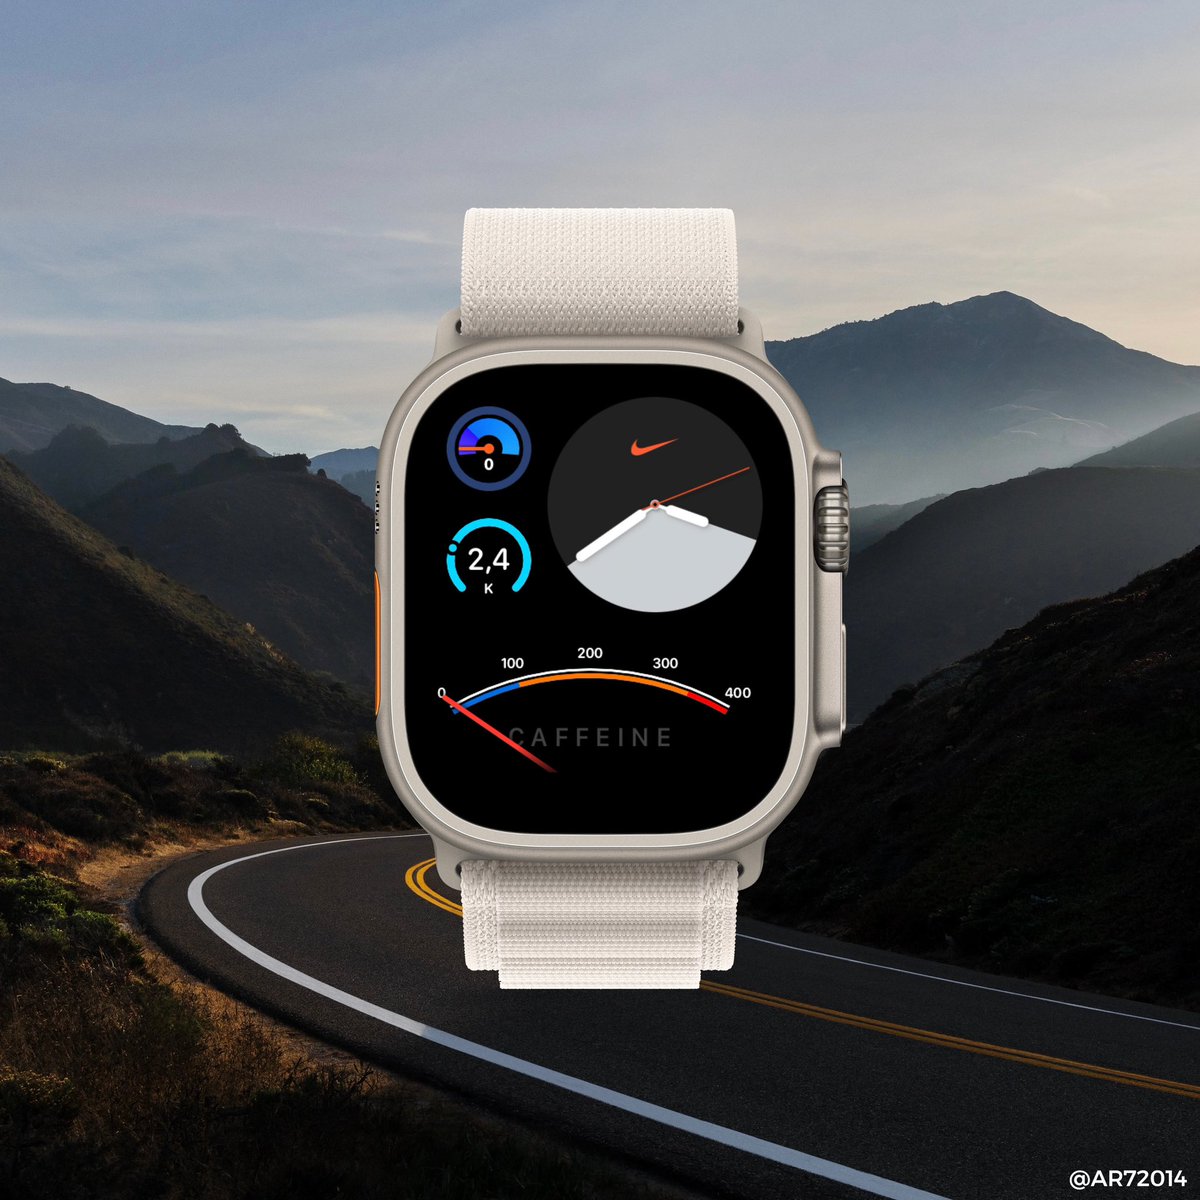 #Apple #AppleWatch #AppleWatchUltra #watchface #watchfaces #watchOS9 

⌚️

SUNDAY - Watch Face   

Nike Caffeine

👀

drive.google.com/drive/folders/…

Download with Browser 

By @AR72014